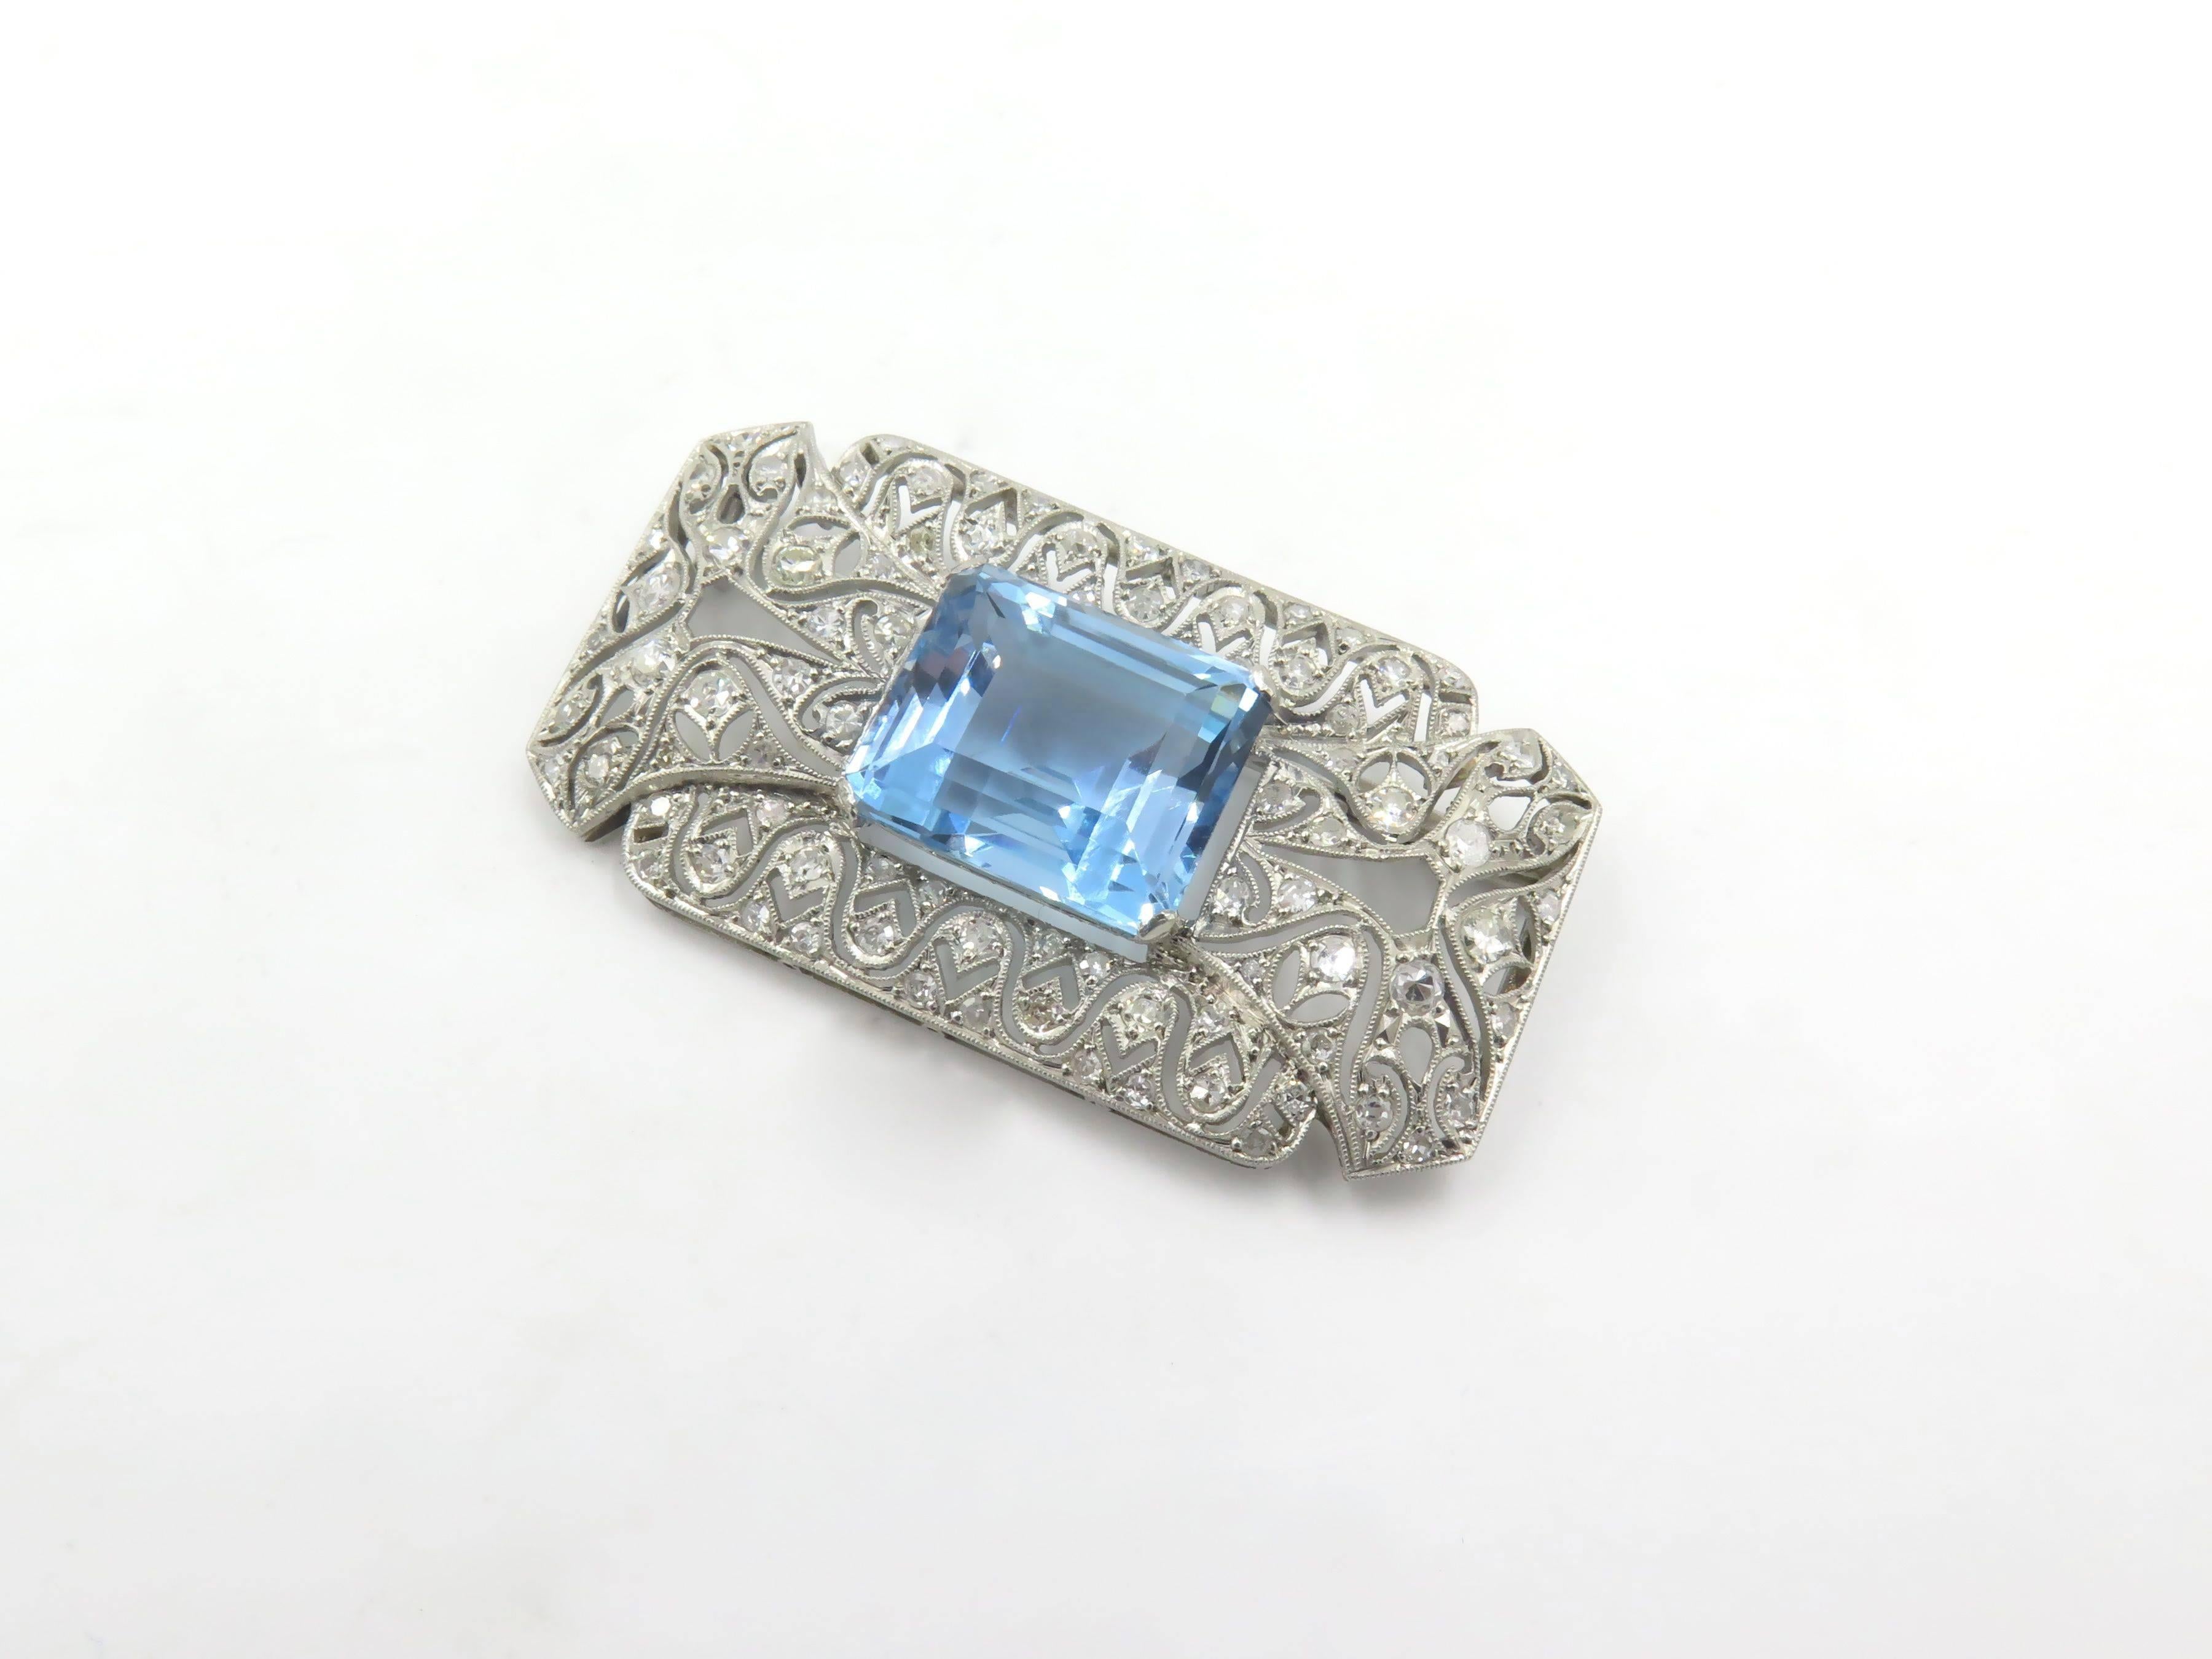 A platinum, aquamarine and diamond brooch. Circa 1930. Designed as a rectangular pierced and openwork circular-cut diamond plaque, centering an emerald cut aquamarine, measuring approximately 15.50 x 13.10 x 10.00mm, and weighing approximately 15.00